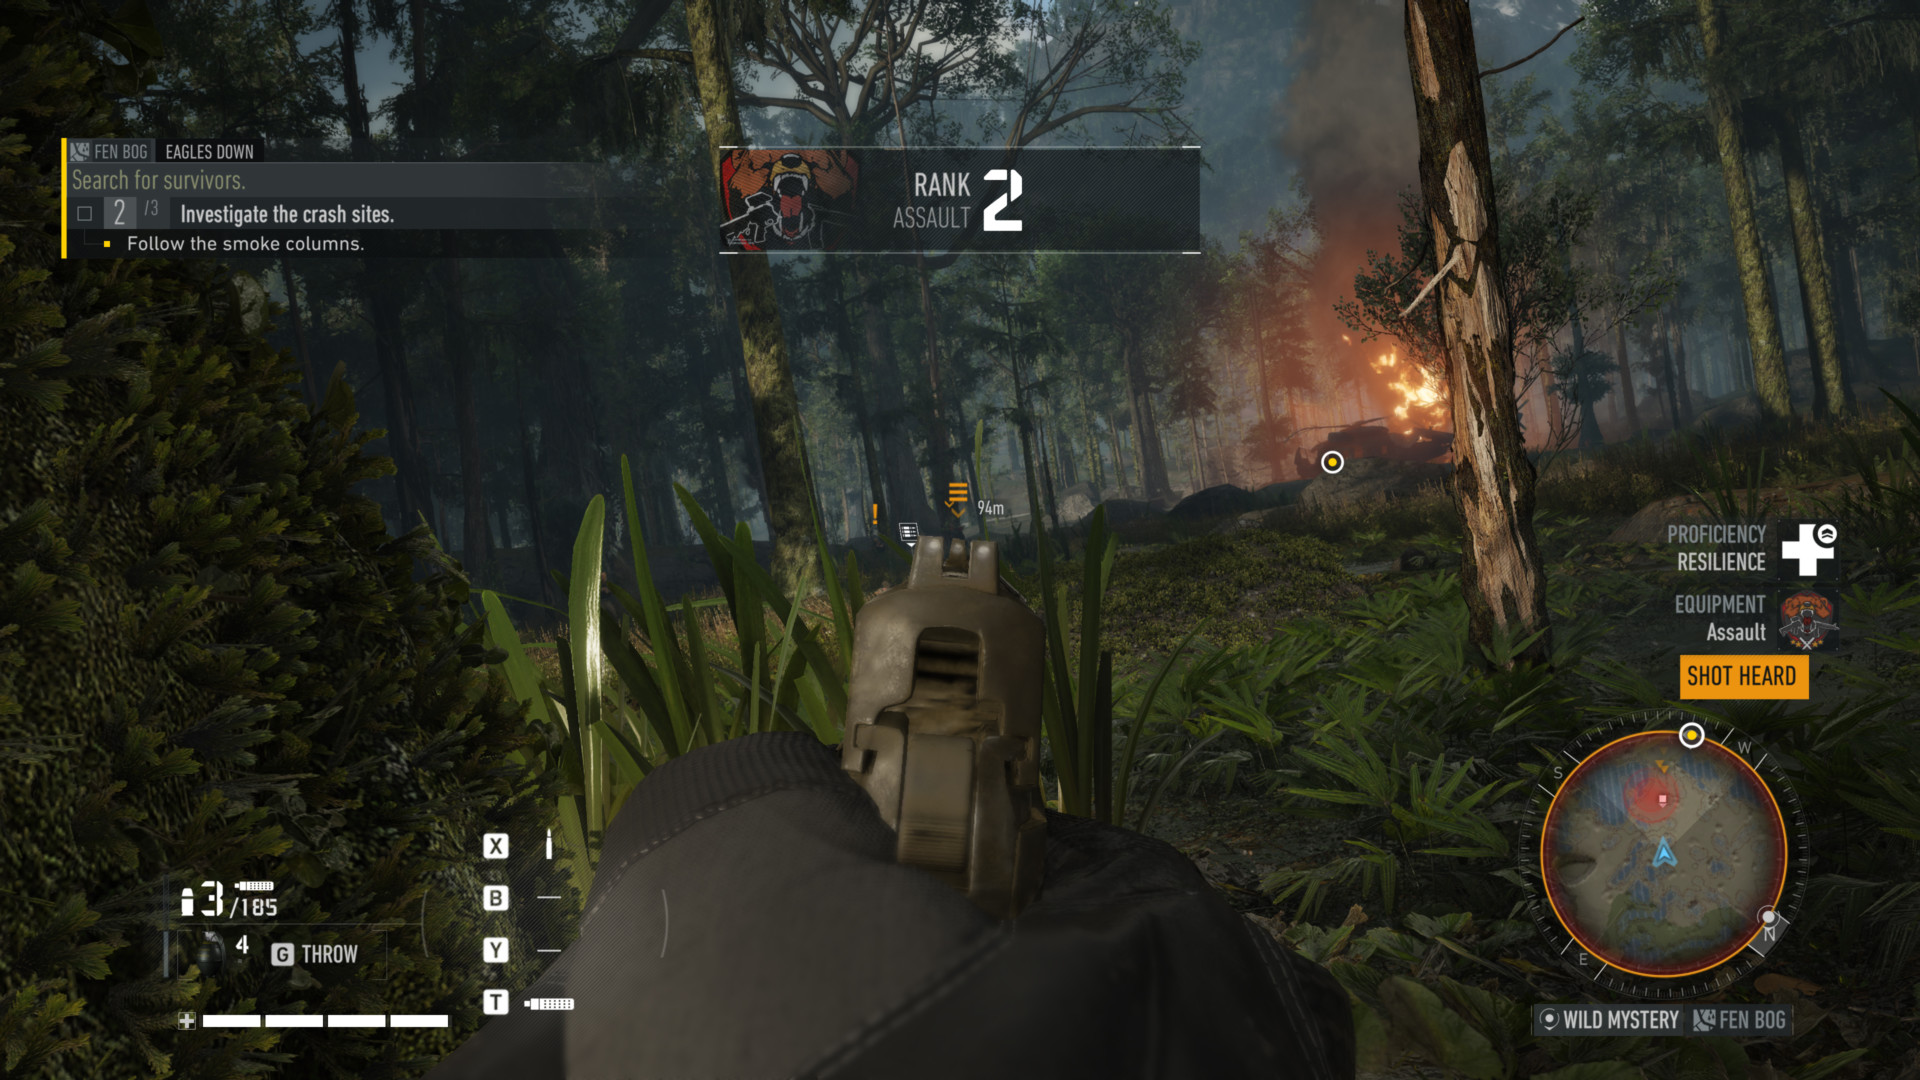 New rank screenshot of Tom Clancy’s Ghost Recon: Breakpoint video game interface.